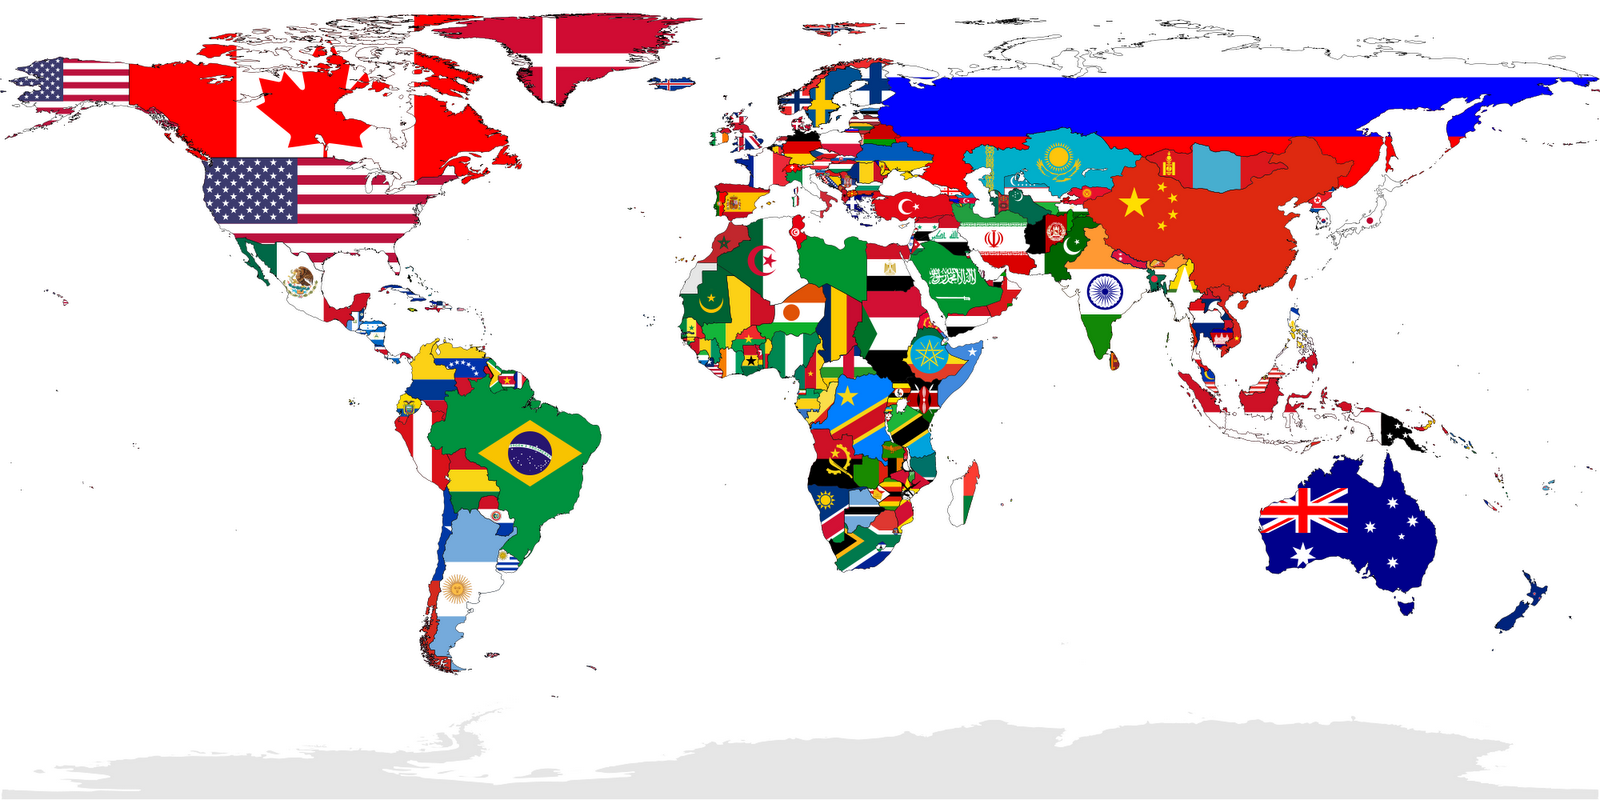 http://1.bp.blogspot.com/_L-hNQtiPYac/TPwBYgMcTRI/AAAAAAAAAoU/KGZEtxgHIS0/s1600/2000px-Flag-map_of_the_world.svg.png